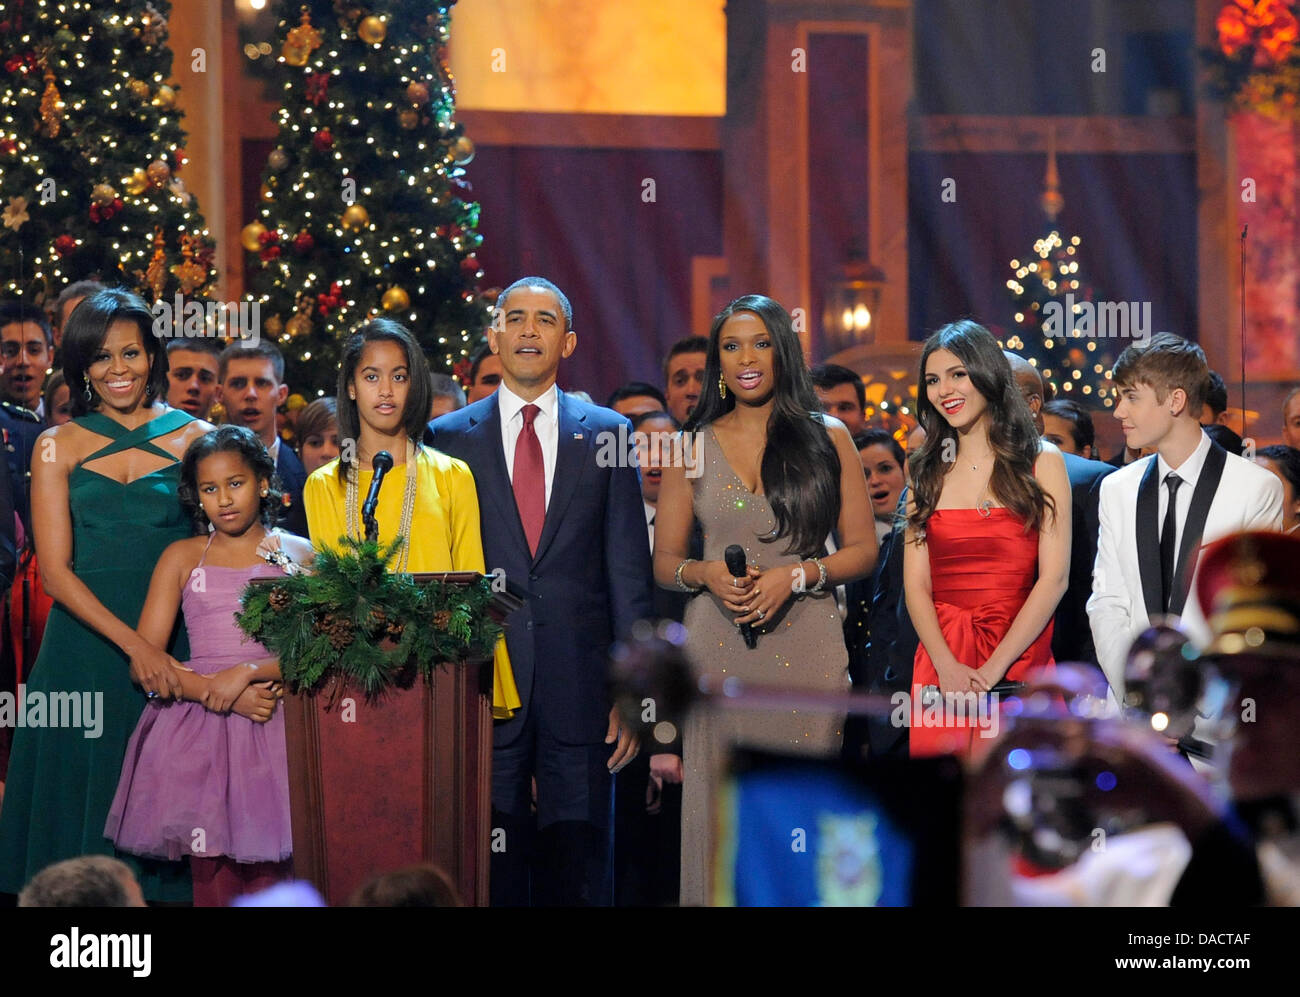 United States President Barack Obama (C), first lady Michelle Obama and daughters Malia and Sasha are joined by entertainers (L-R) Jennifer Hudson, Victoria Justice and Justin Bieber for a final song at the conclusion of the performances at the annual "Christmas in Washington" gala, December 11, 2011, Washington, DC.  Credit: Mike Theiler / Pool via CNP Stock Photo